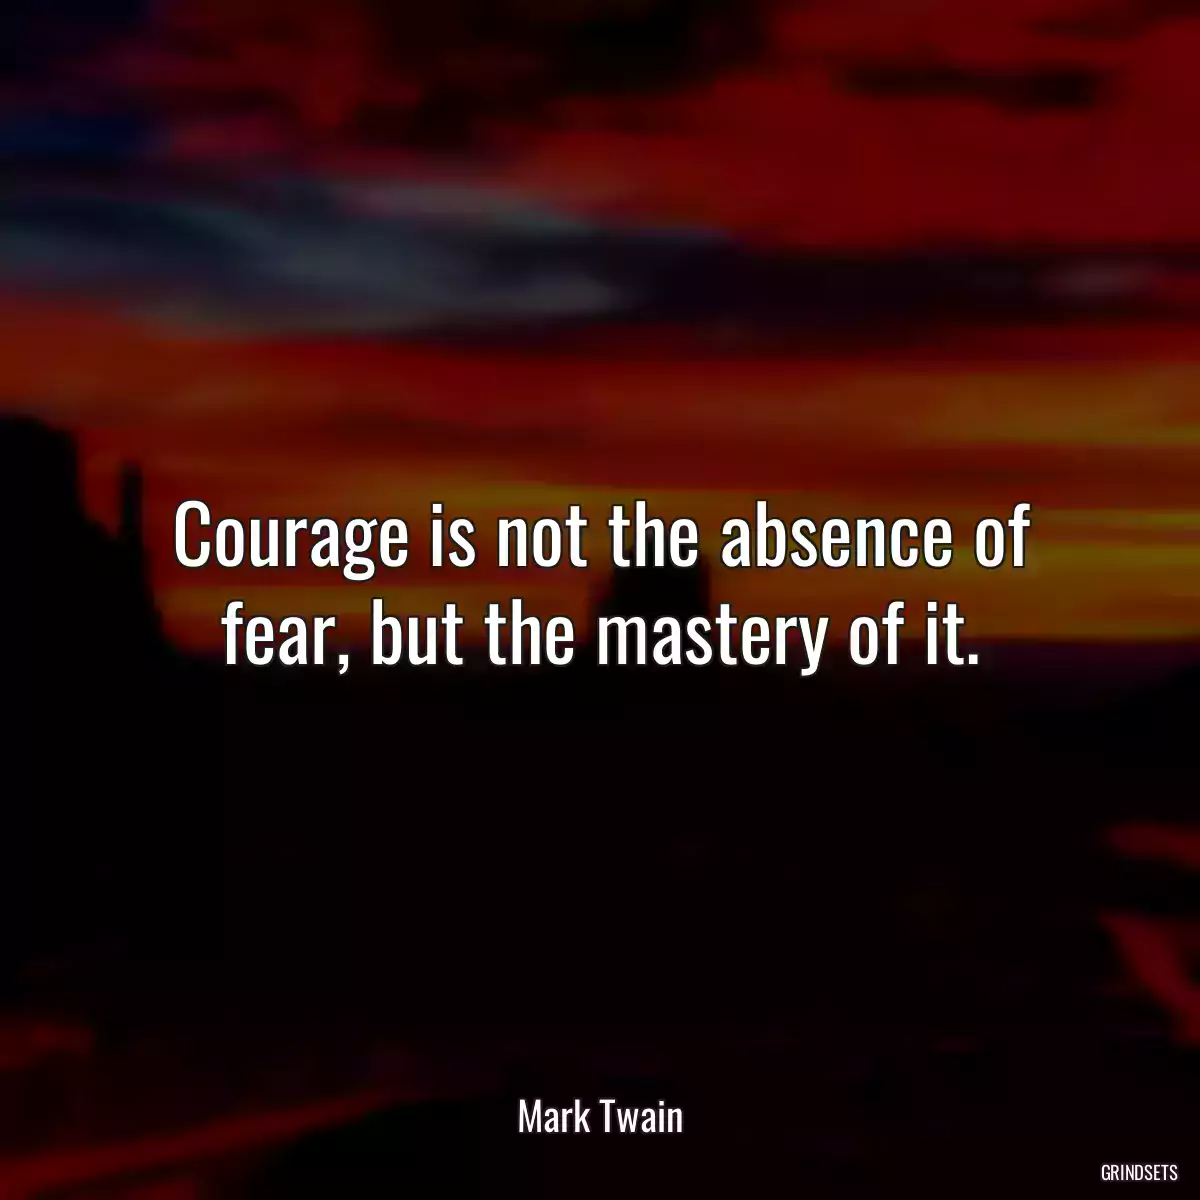 Courage is not the absence of fear, but the mastery of it.